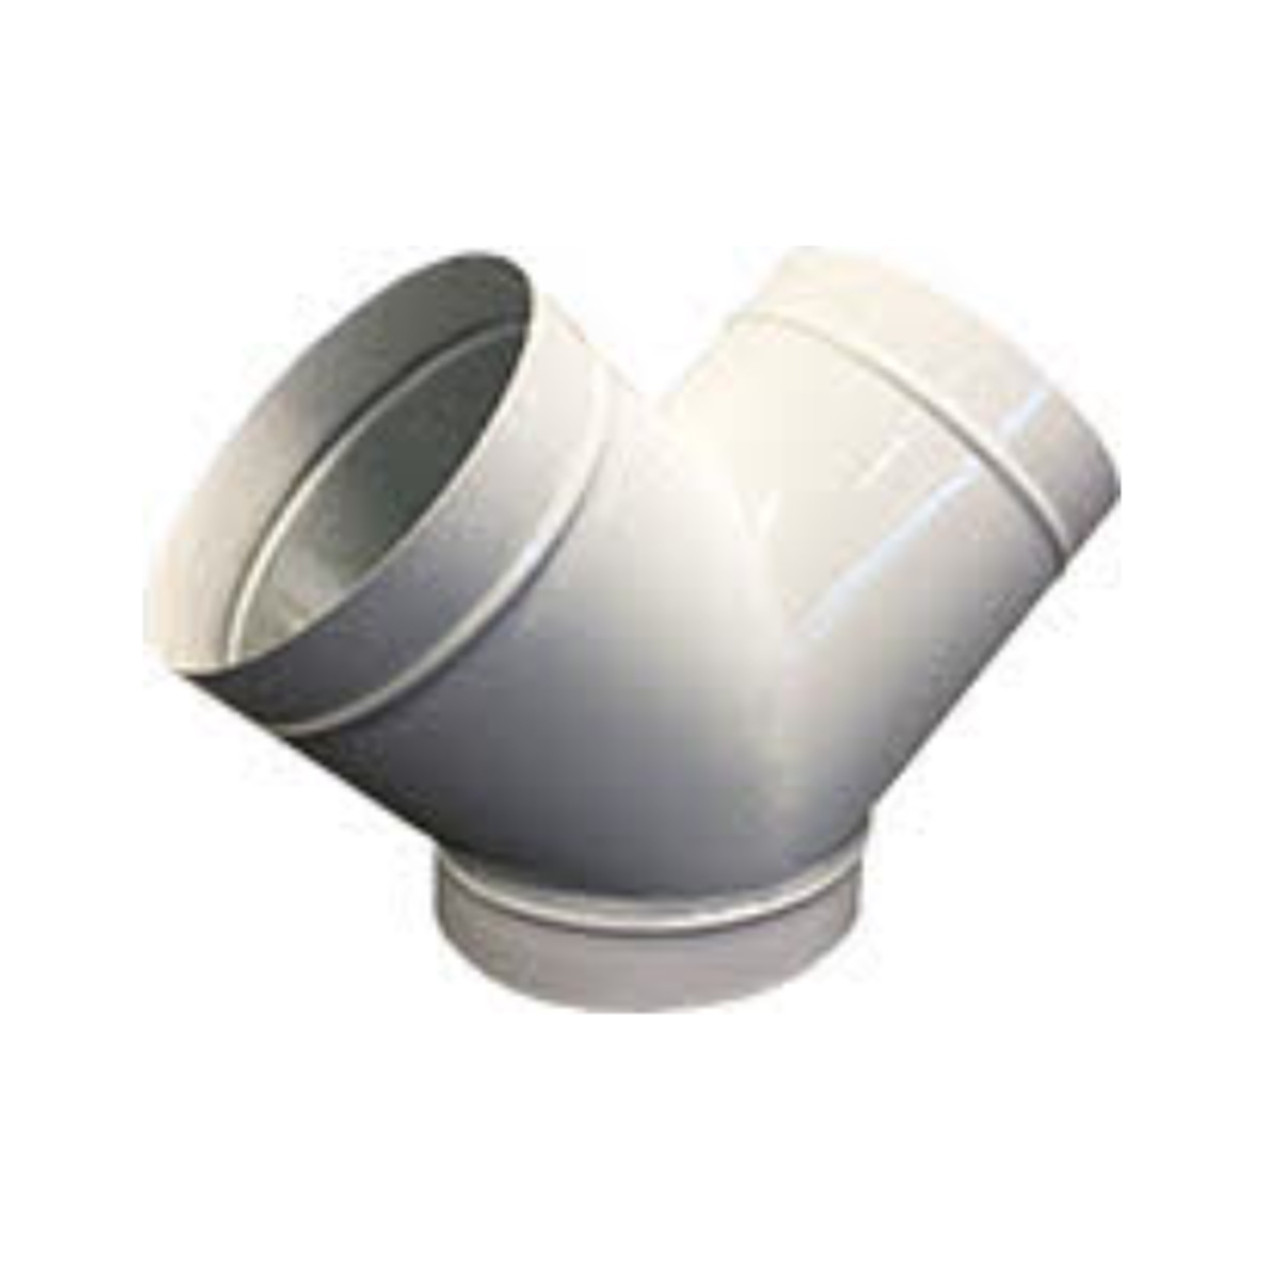 Y duct fitting 150mm x 150mm x 150mm metal